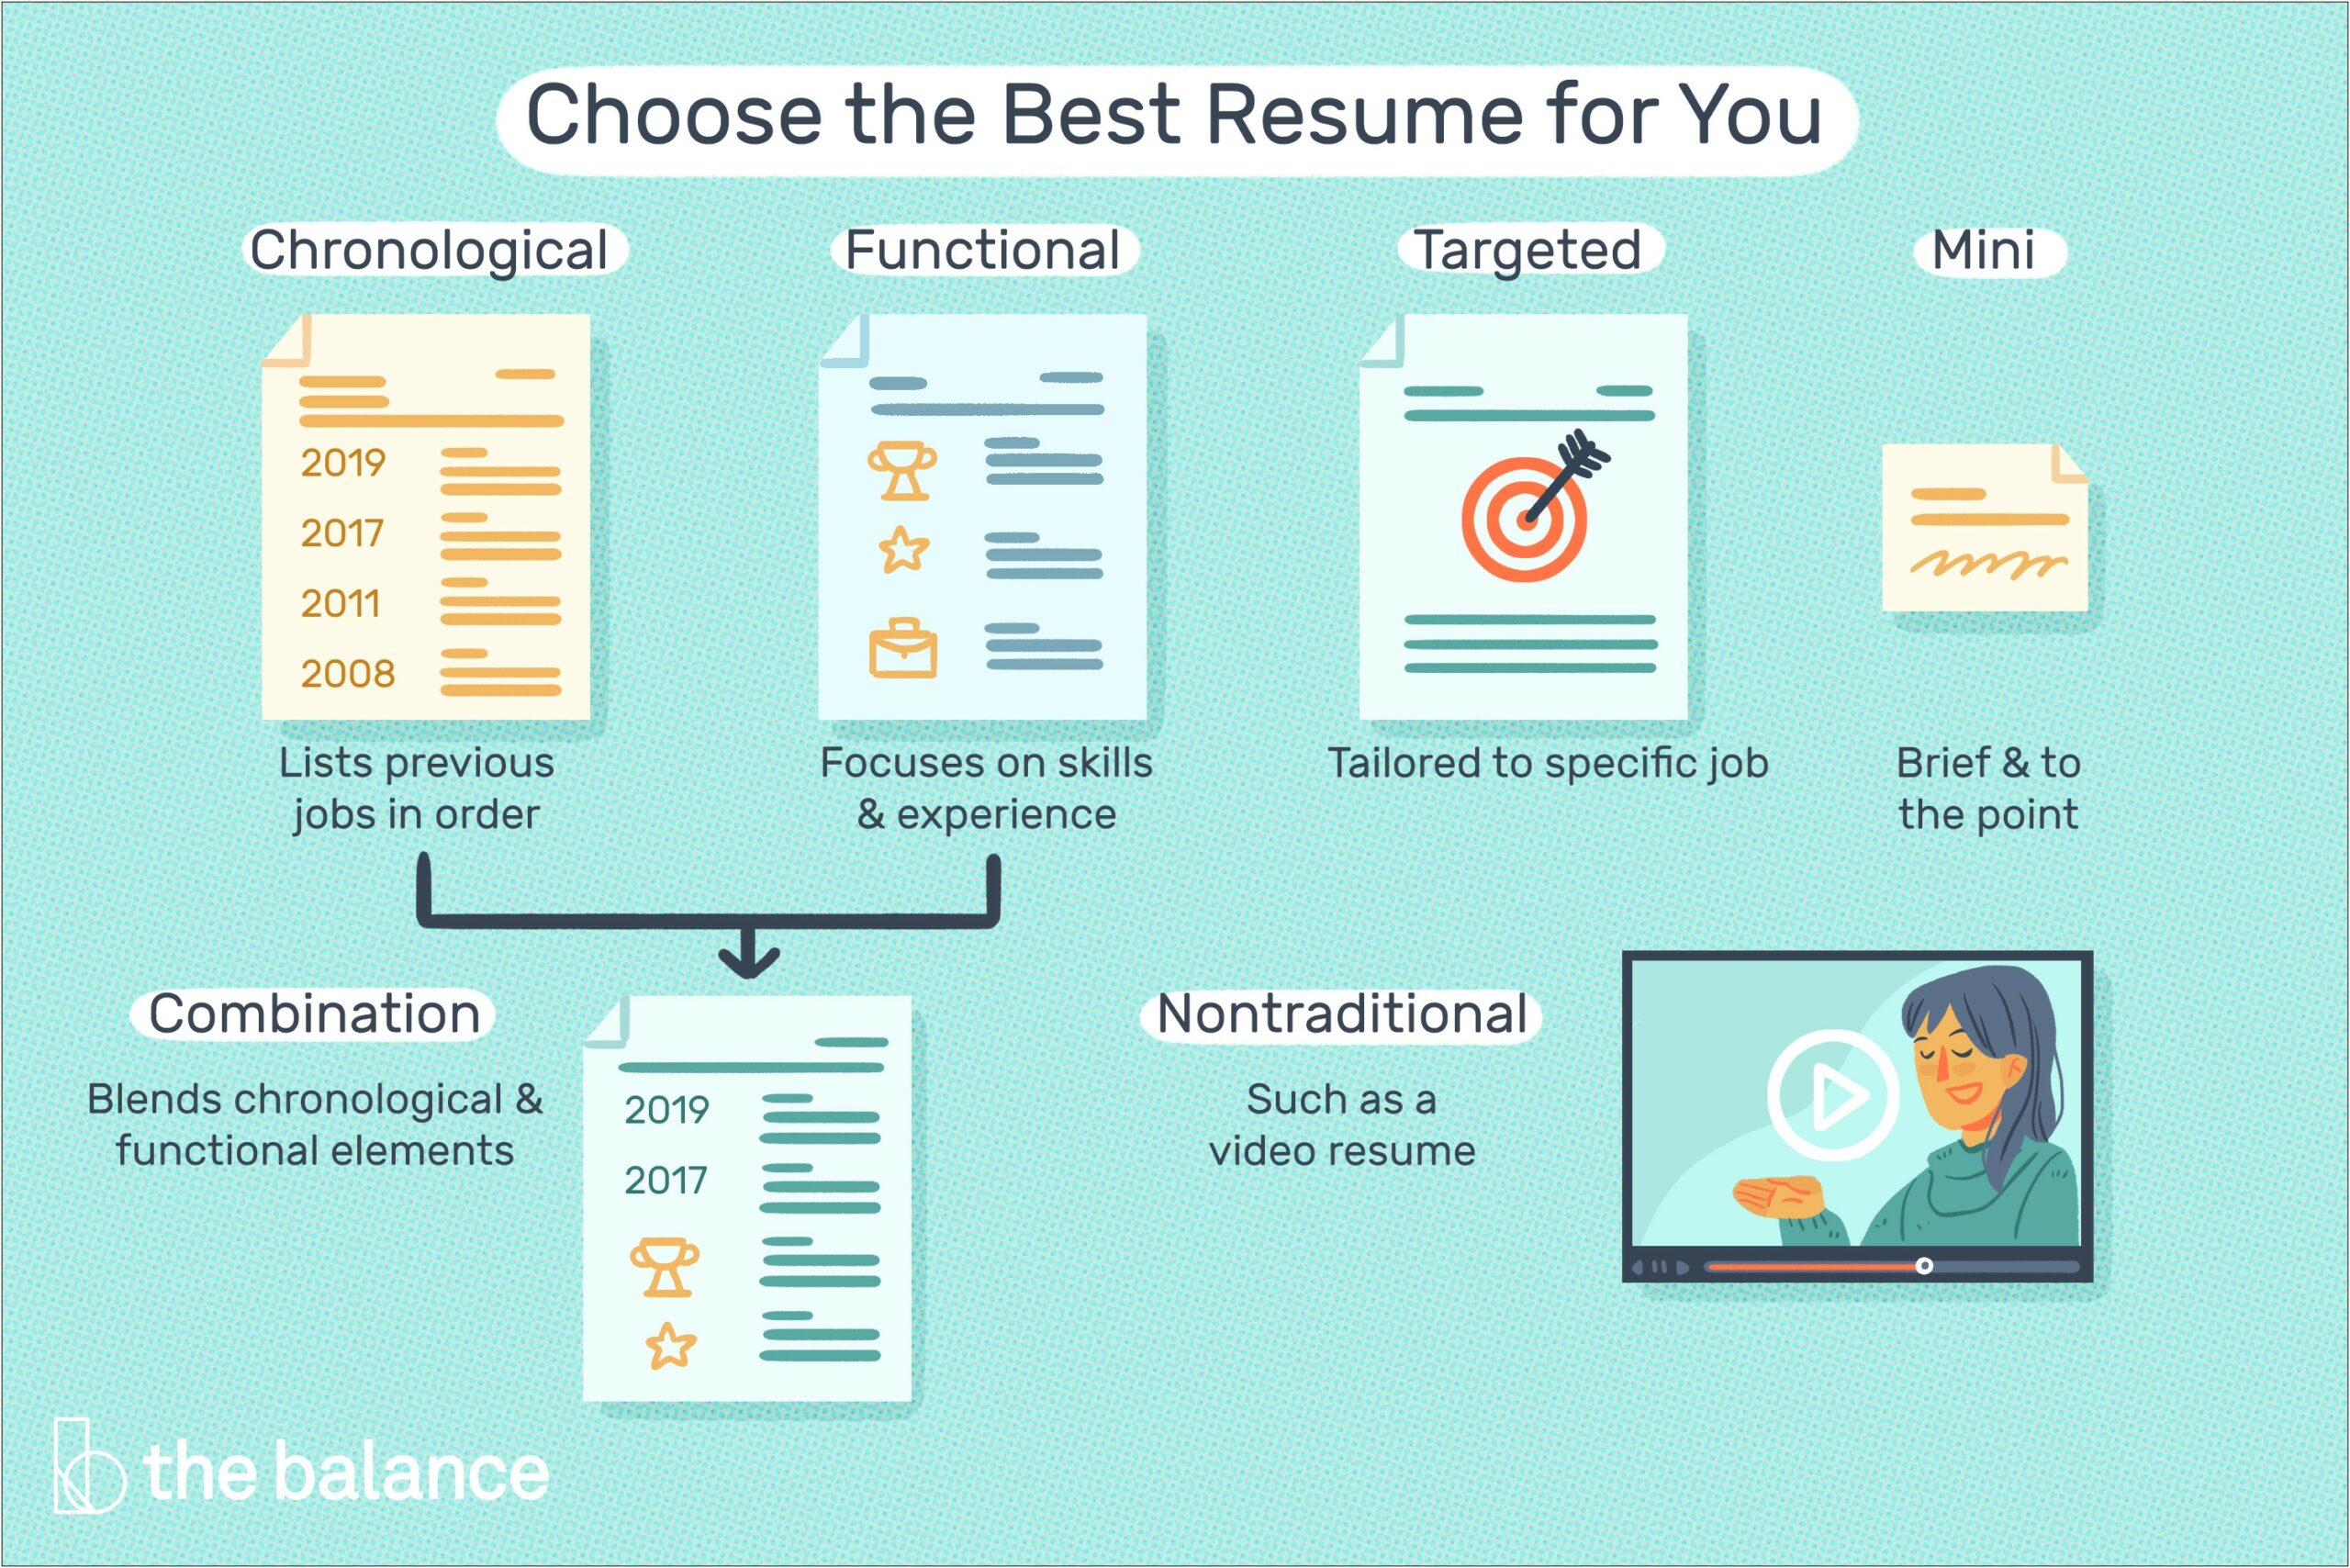 Resume Writing For Tech Jobs